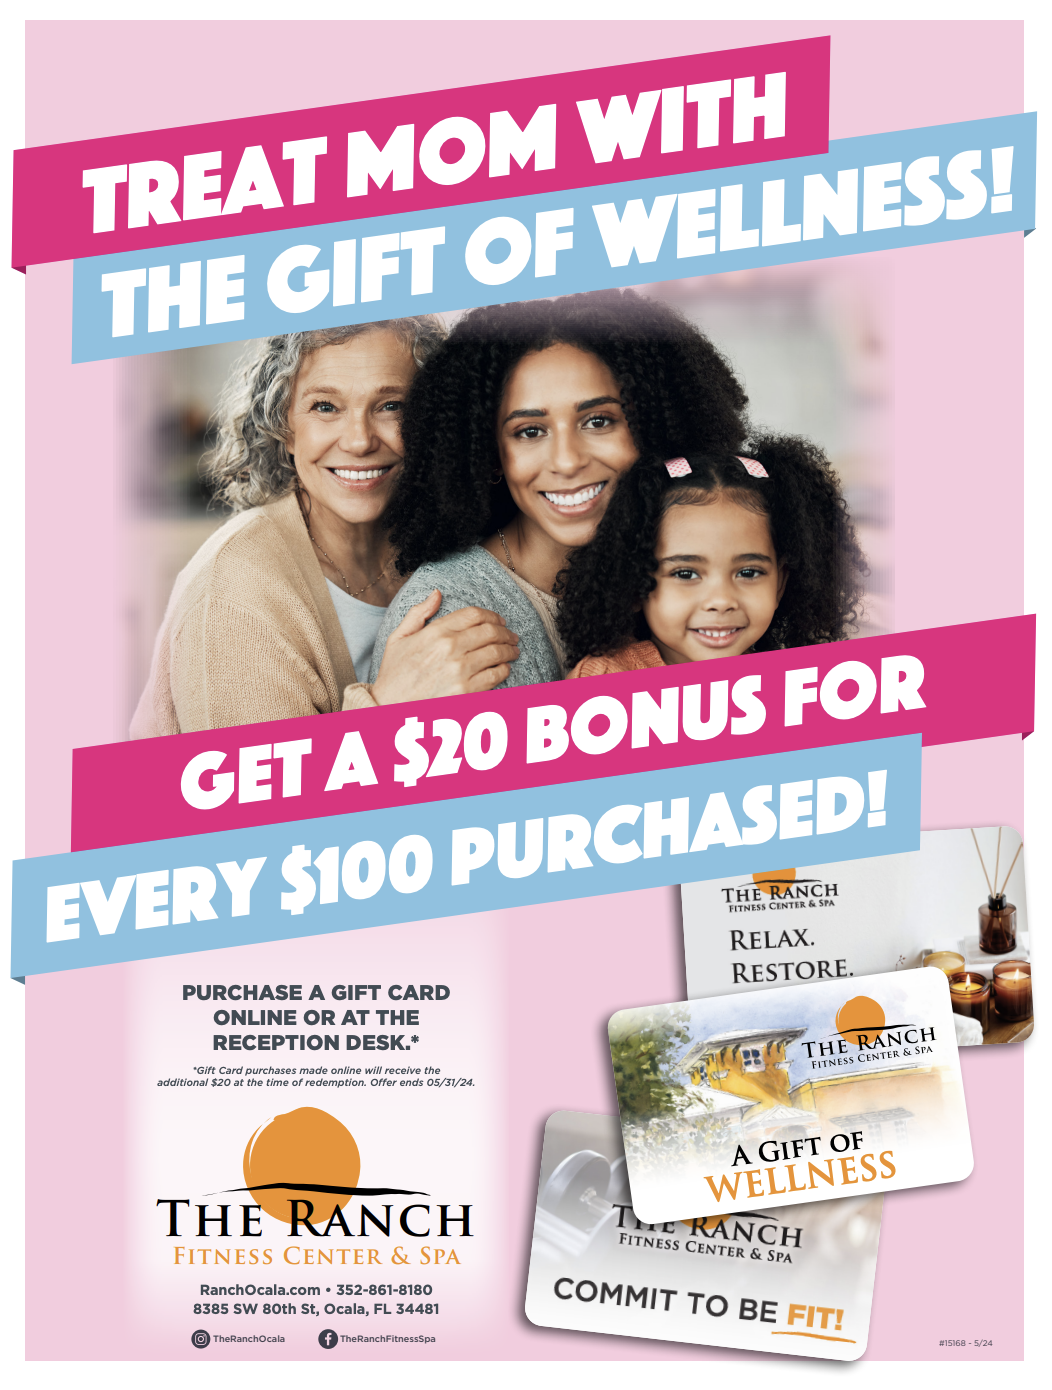 The Ranch Mother's Day Gift card promo!